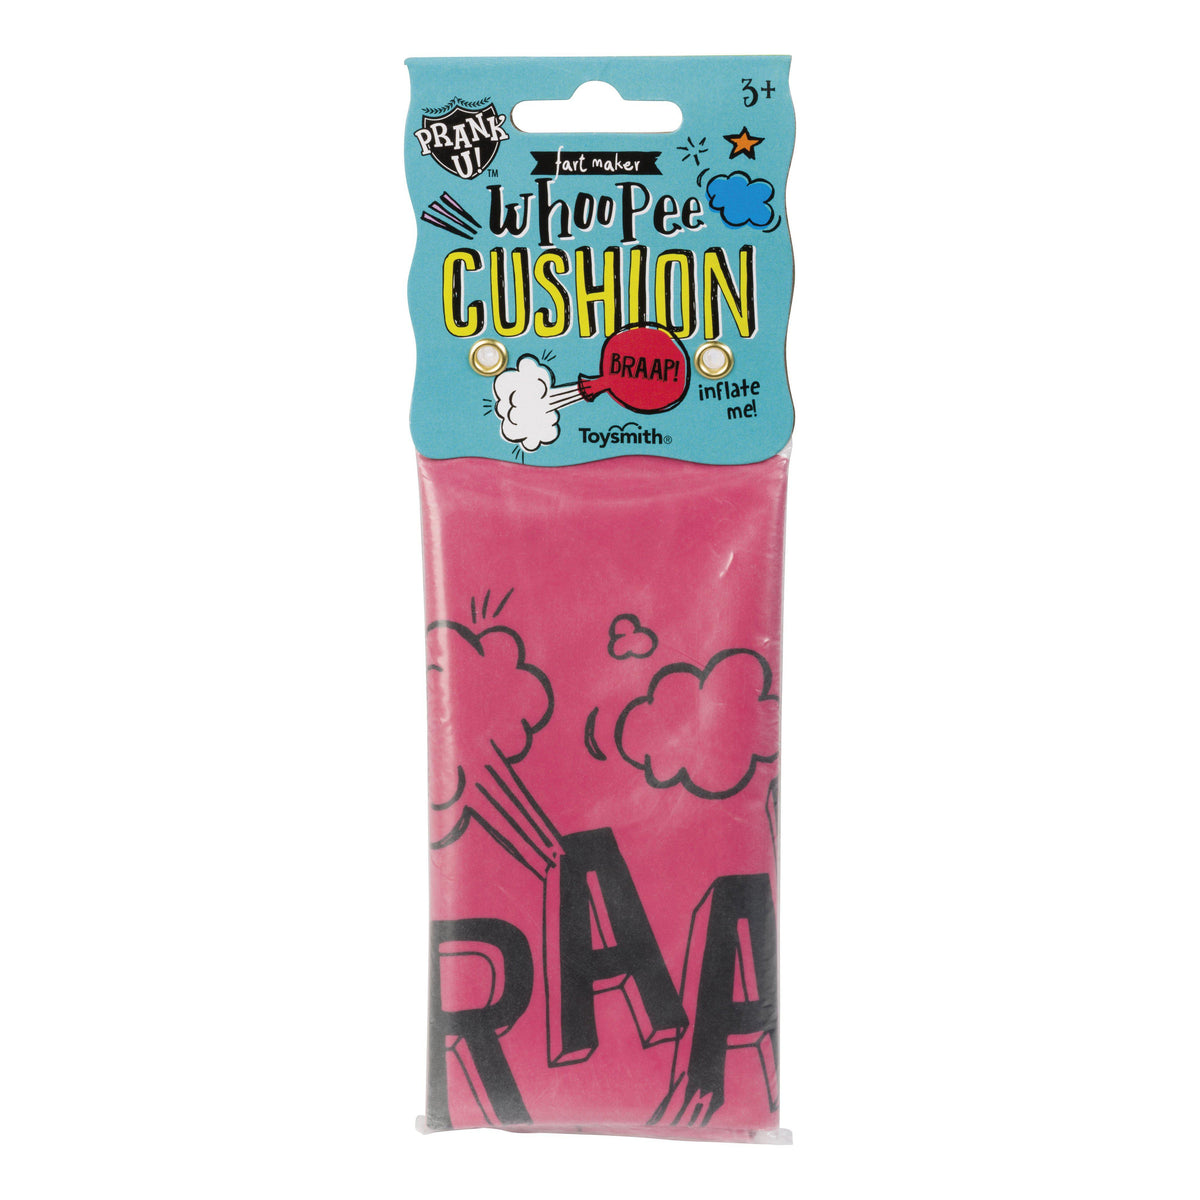 Front view of the whoopee cushion in its packaging.